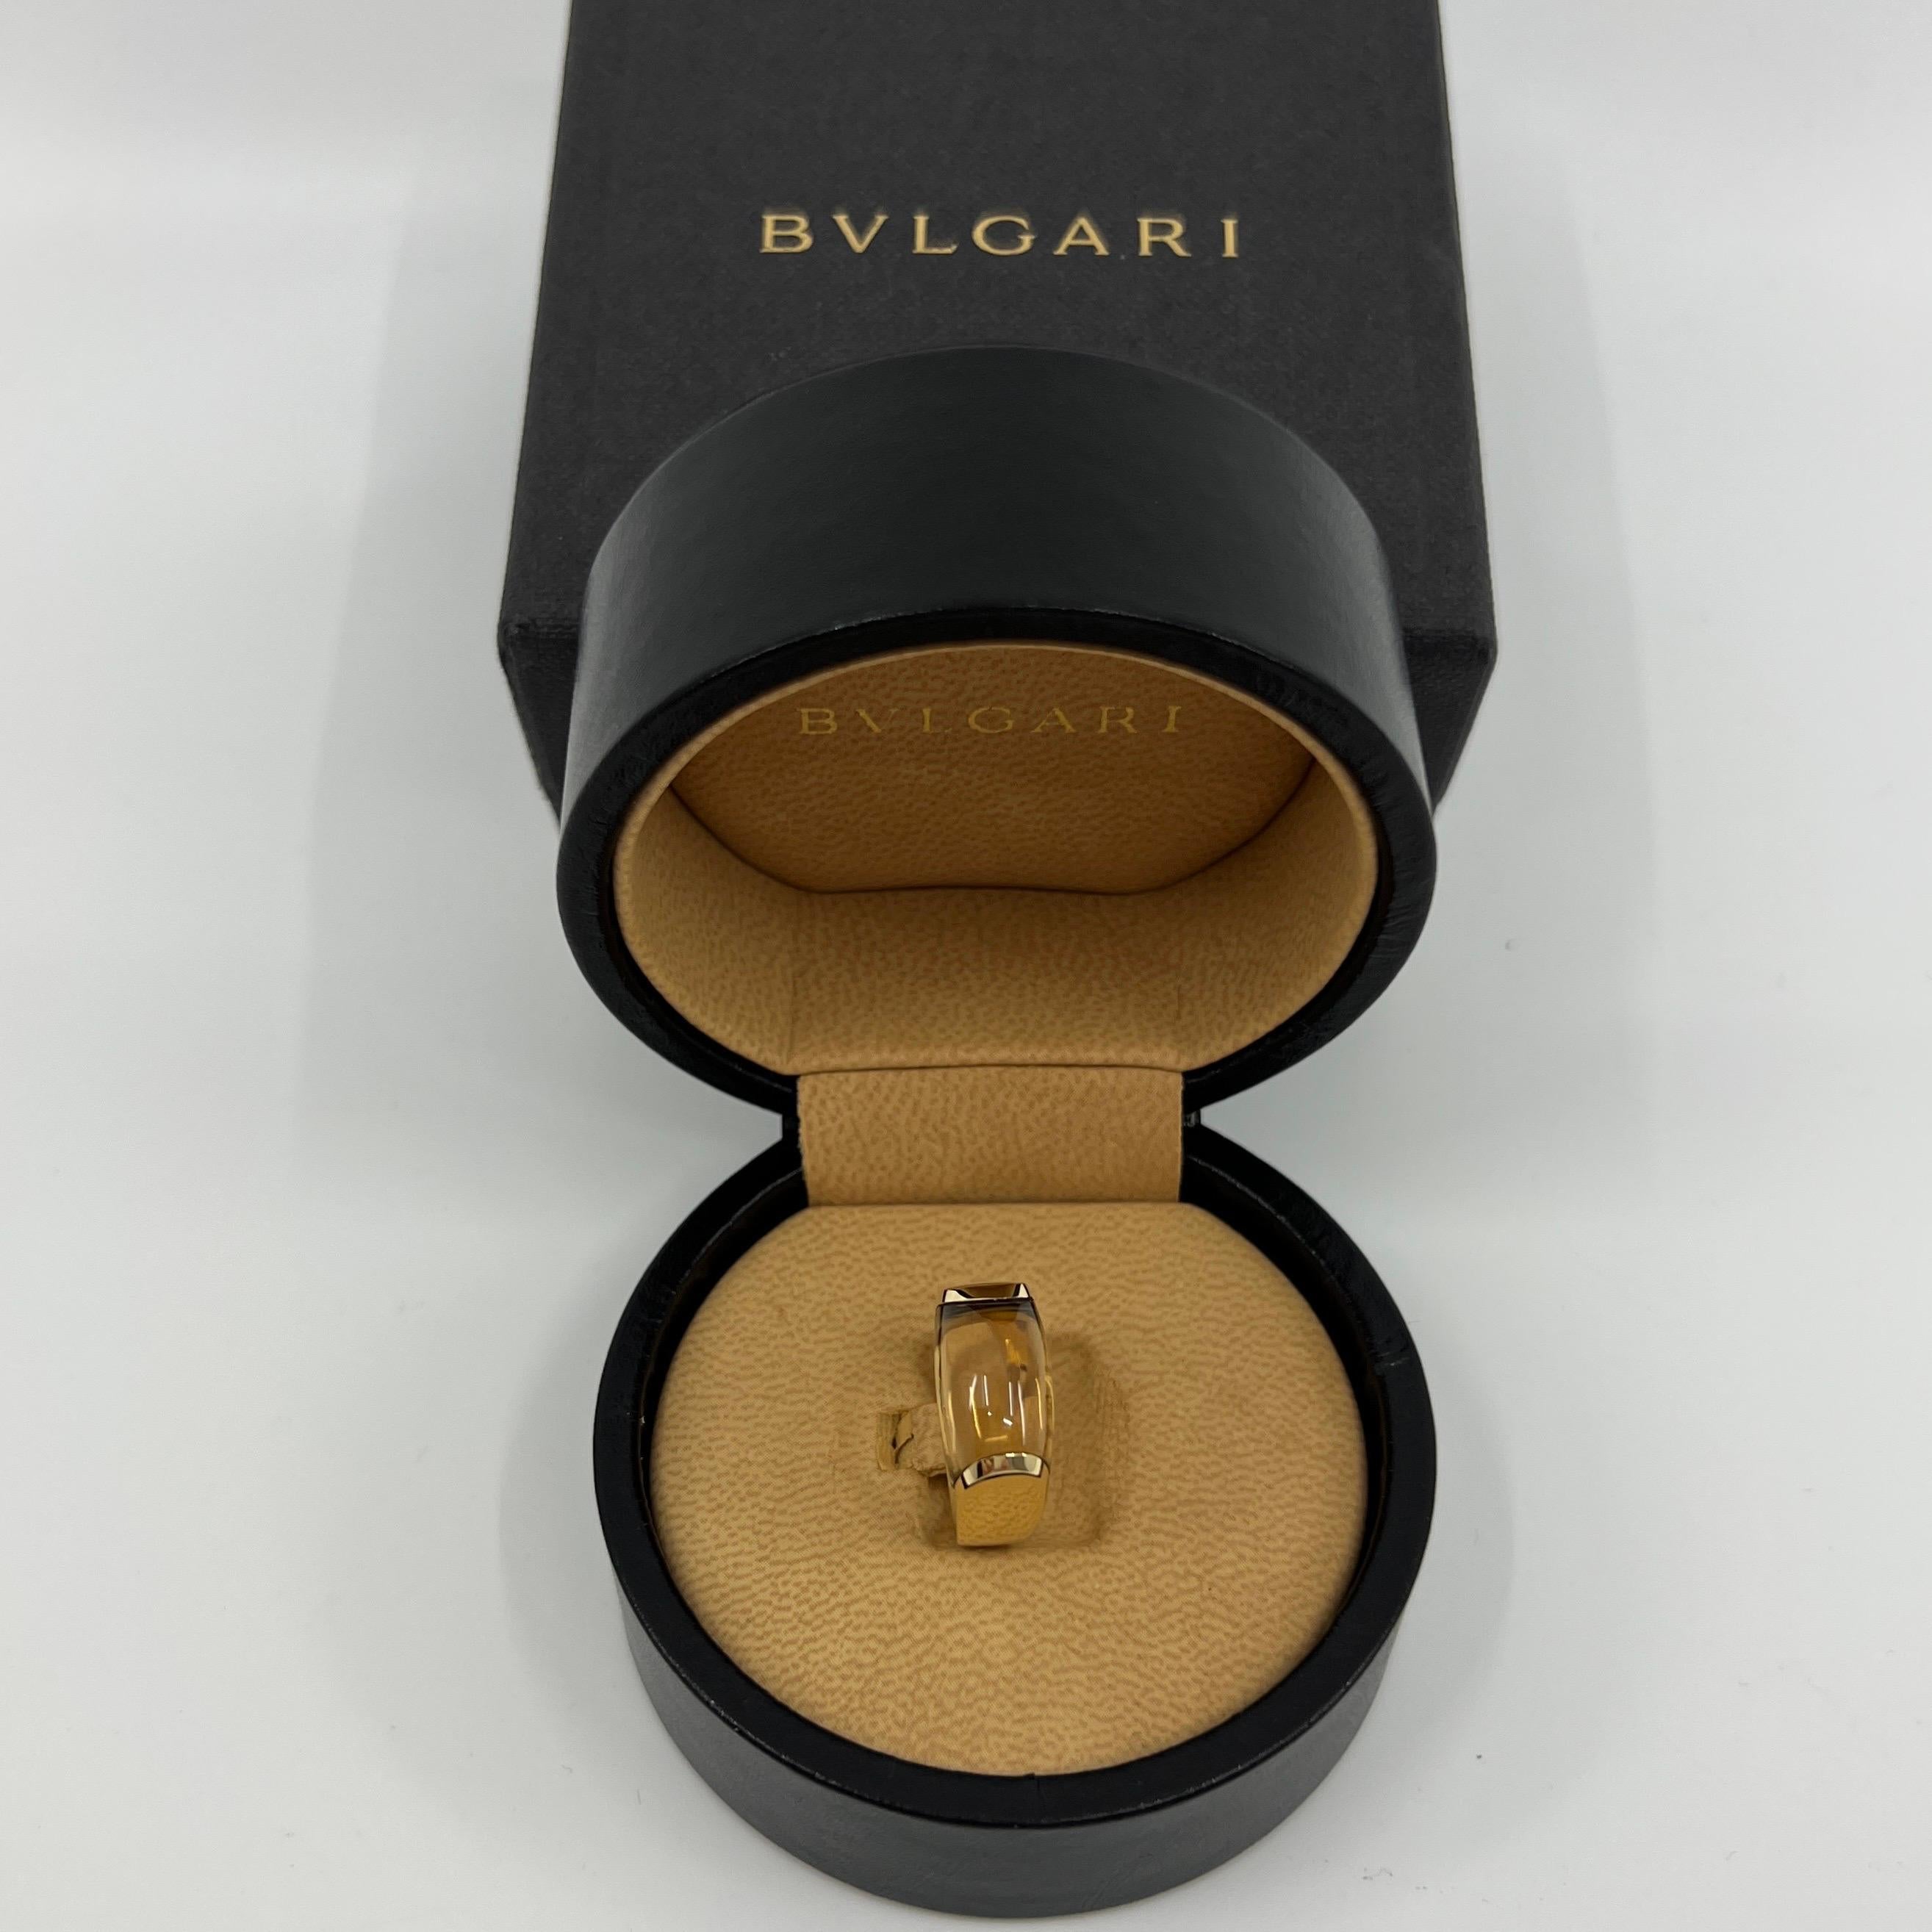 Rare Bvlgari Vivid Yellow Citrine Tronchetto 18k Yellow Gold Ring.

Beautiful domed yellow citrine set in a fine 18k yellow gold tension set ring.

In excellent condition, has been professionally polished and cleaned. Some light marks and abrasions